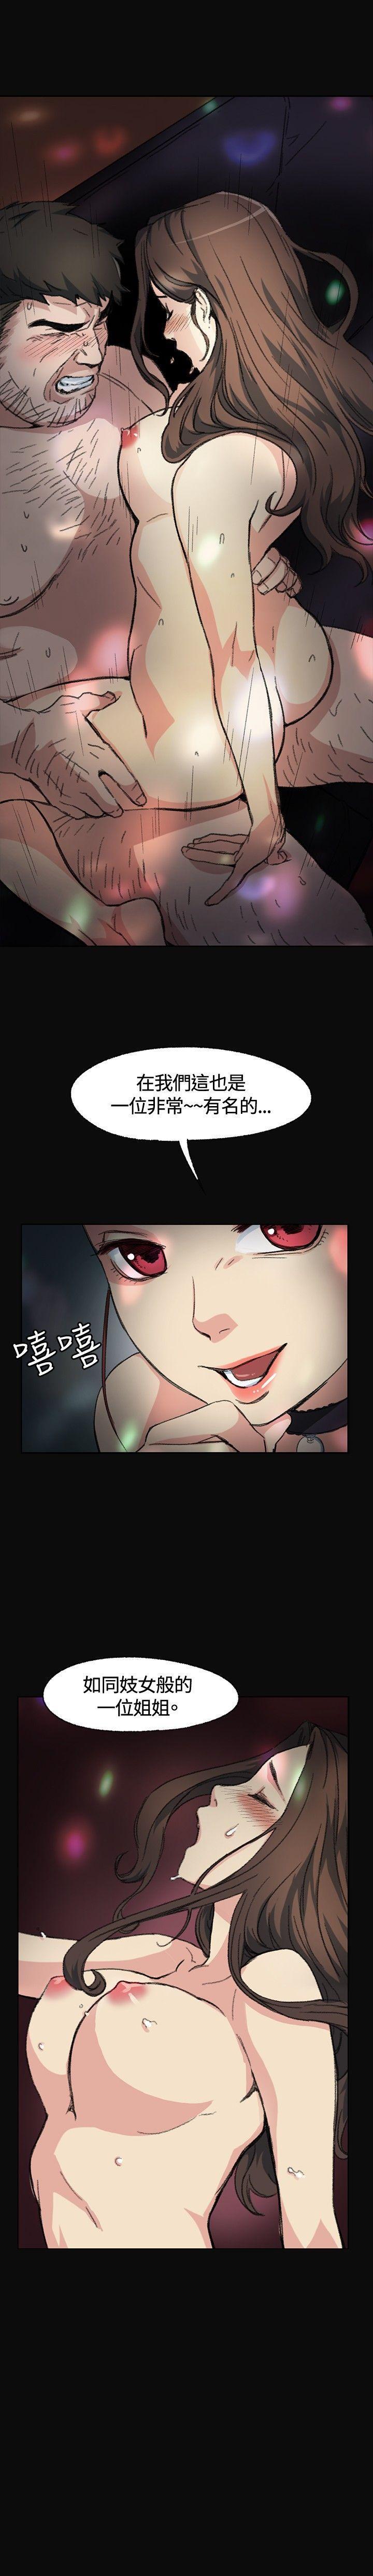 Gay Broken 偶然 1-53 Squirt - Page 9